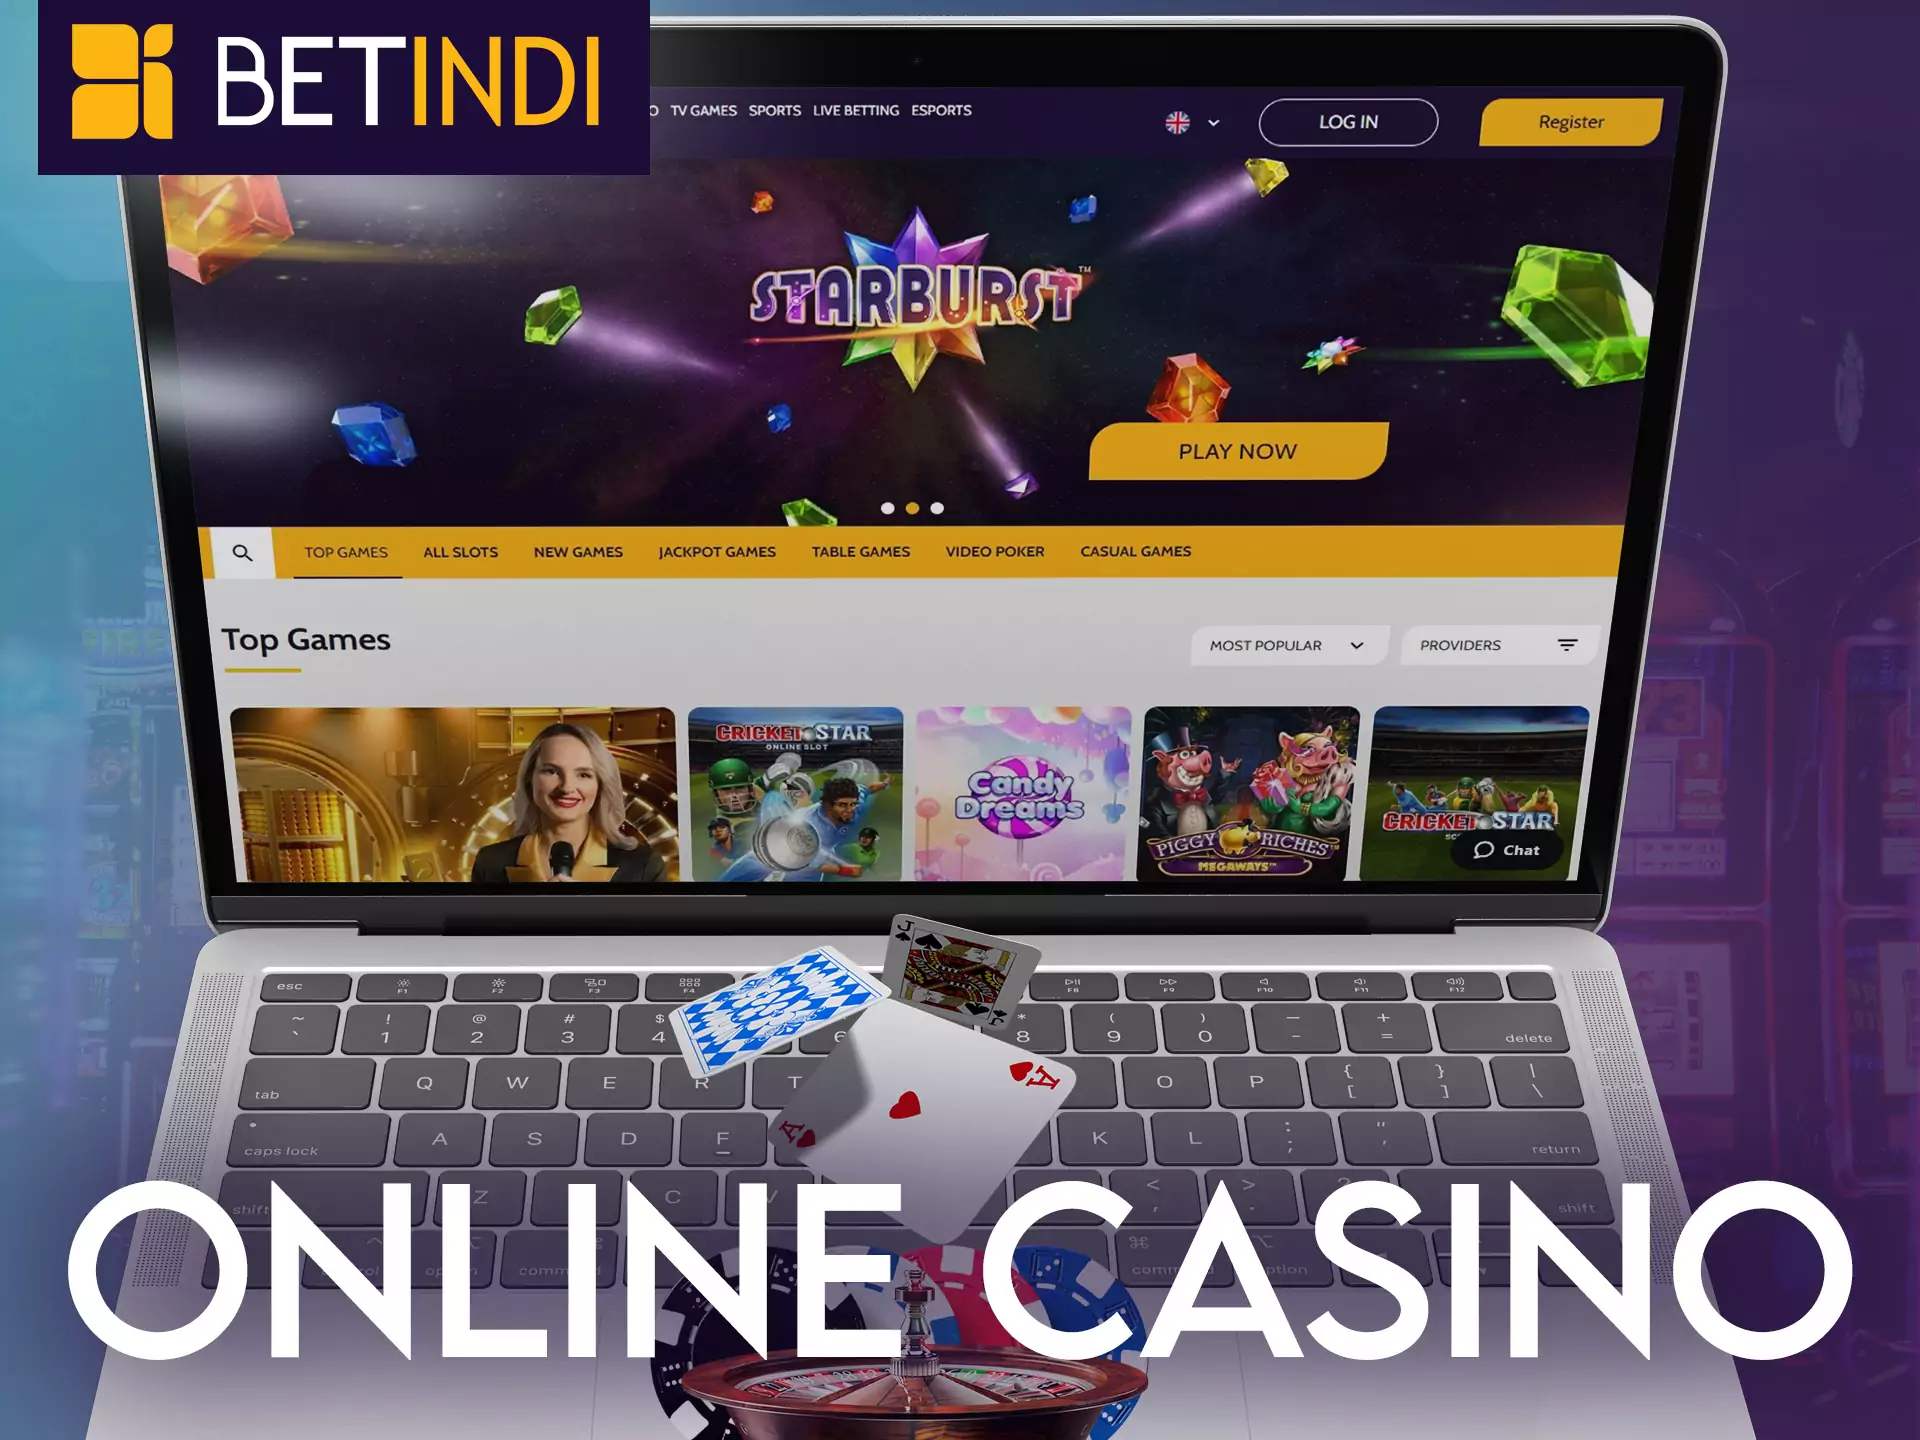 Betindi's online casino offers many different games and entertainment.